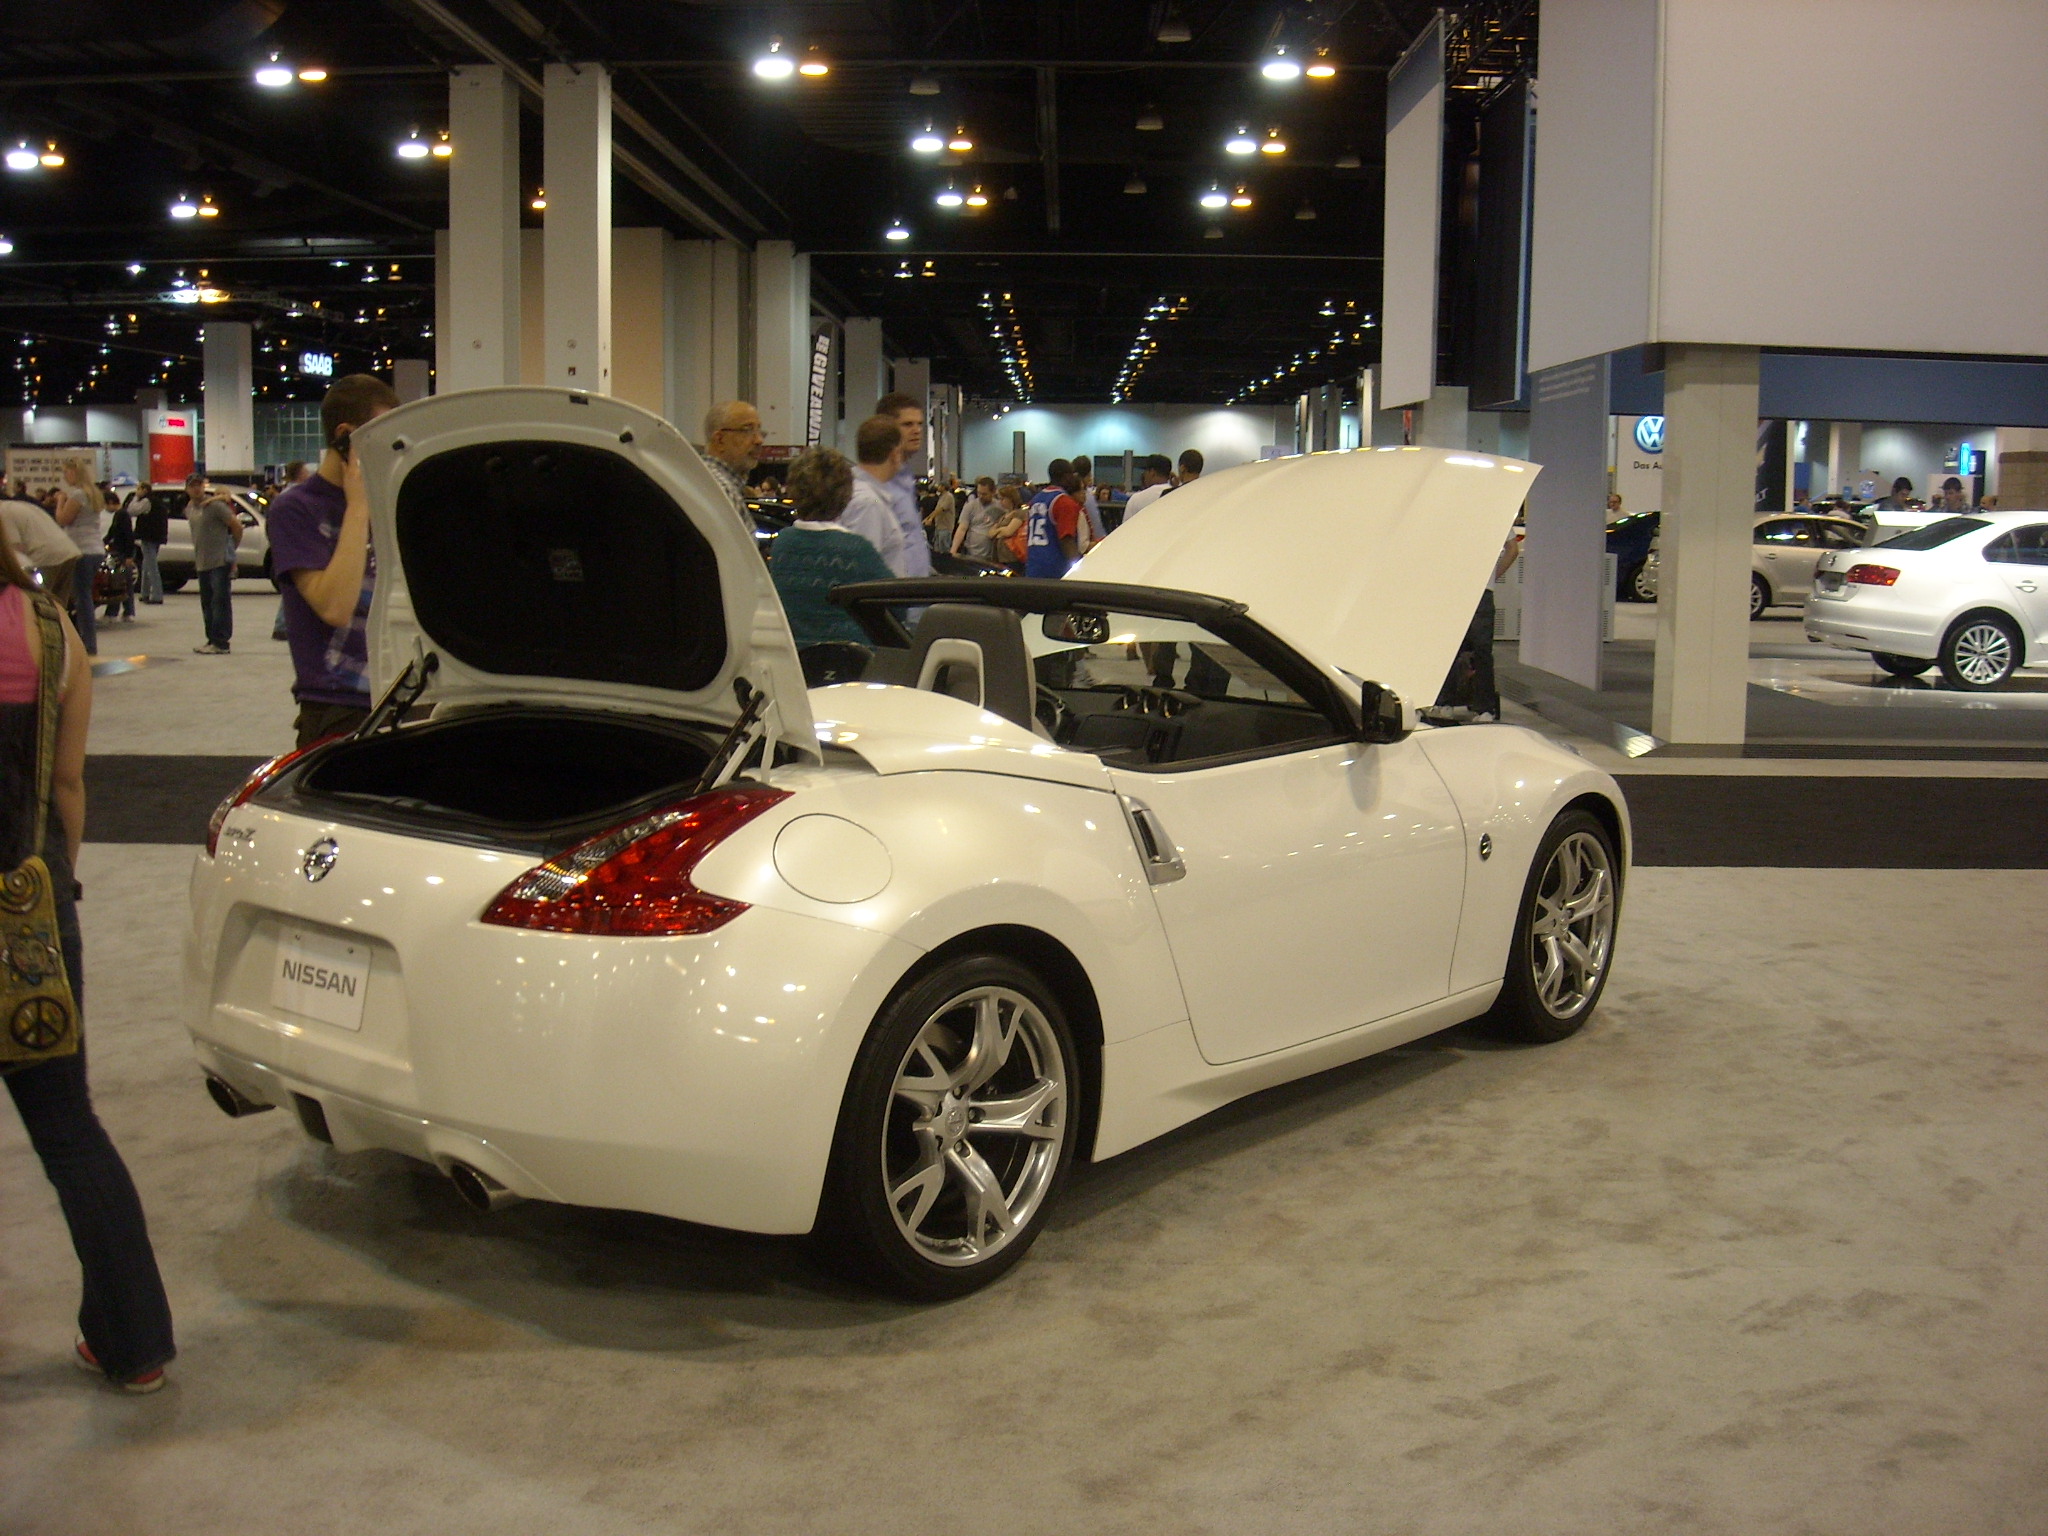 The Nissan 370Z Roadster, my favorite car of the show.